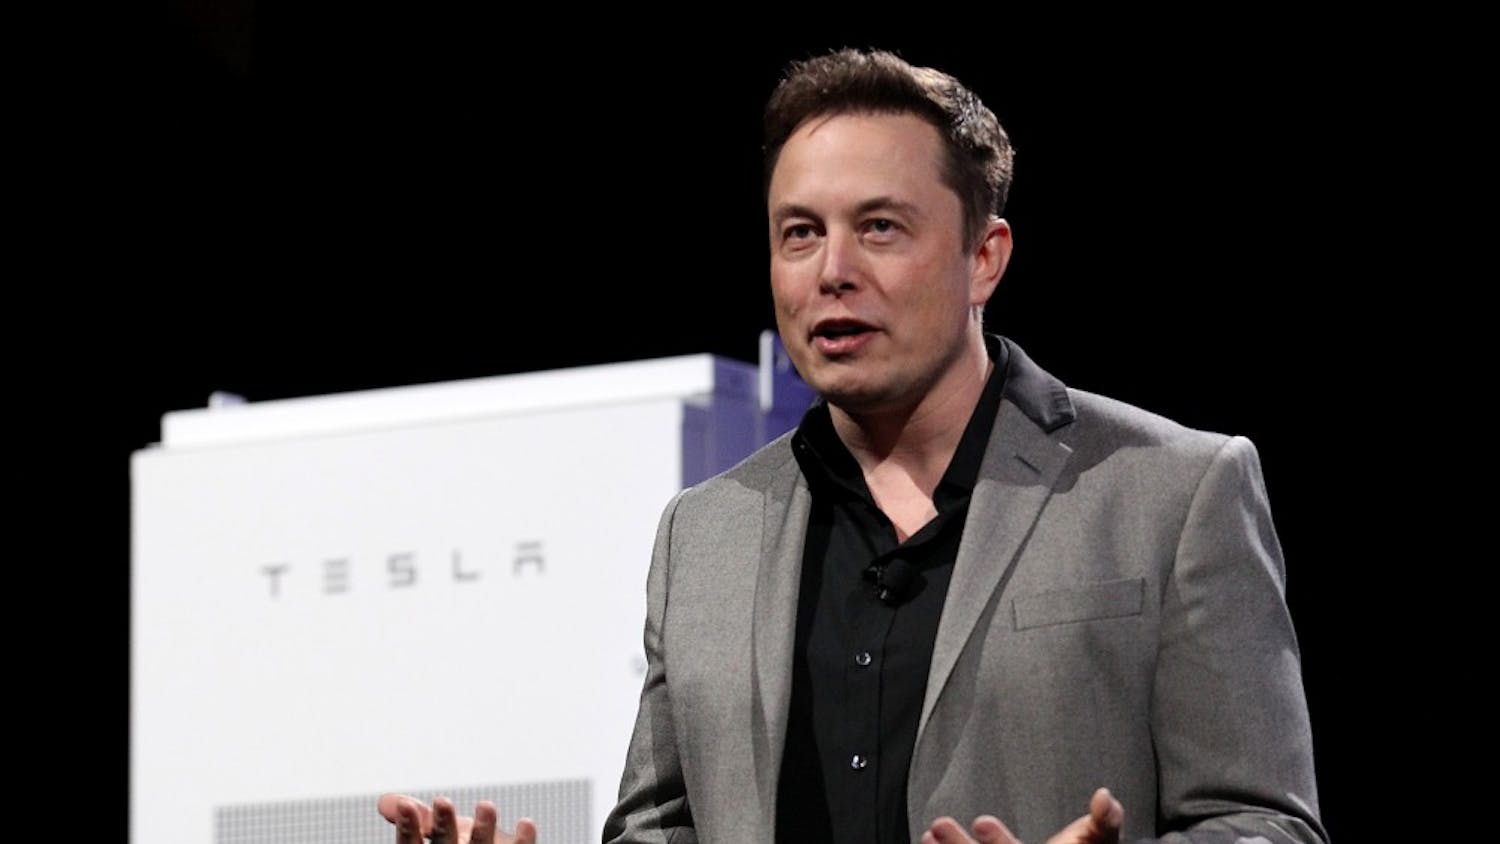 Tesla CEO Elon Musk on Thursday, April 30, 2015 during an event at Tesla's plant in Hawthorne, Calif. Musk has another innovative product up in his sleeve: a $500 flamethrower. (Luis Sinco/Los Angeles Times/TNS)